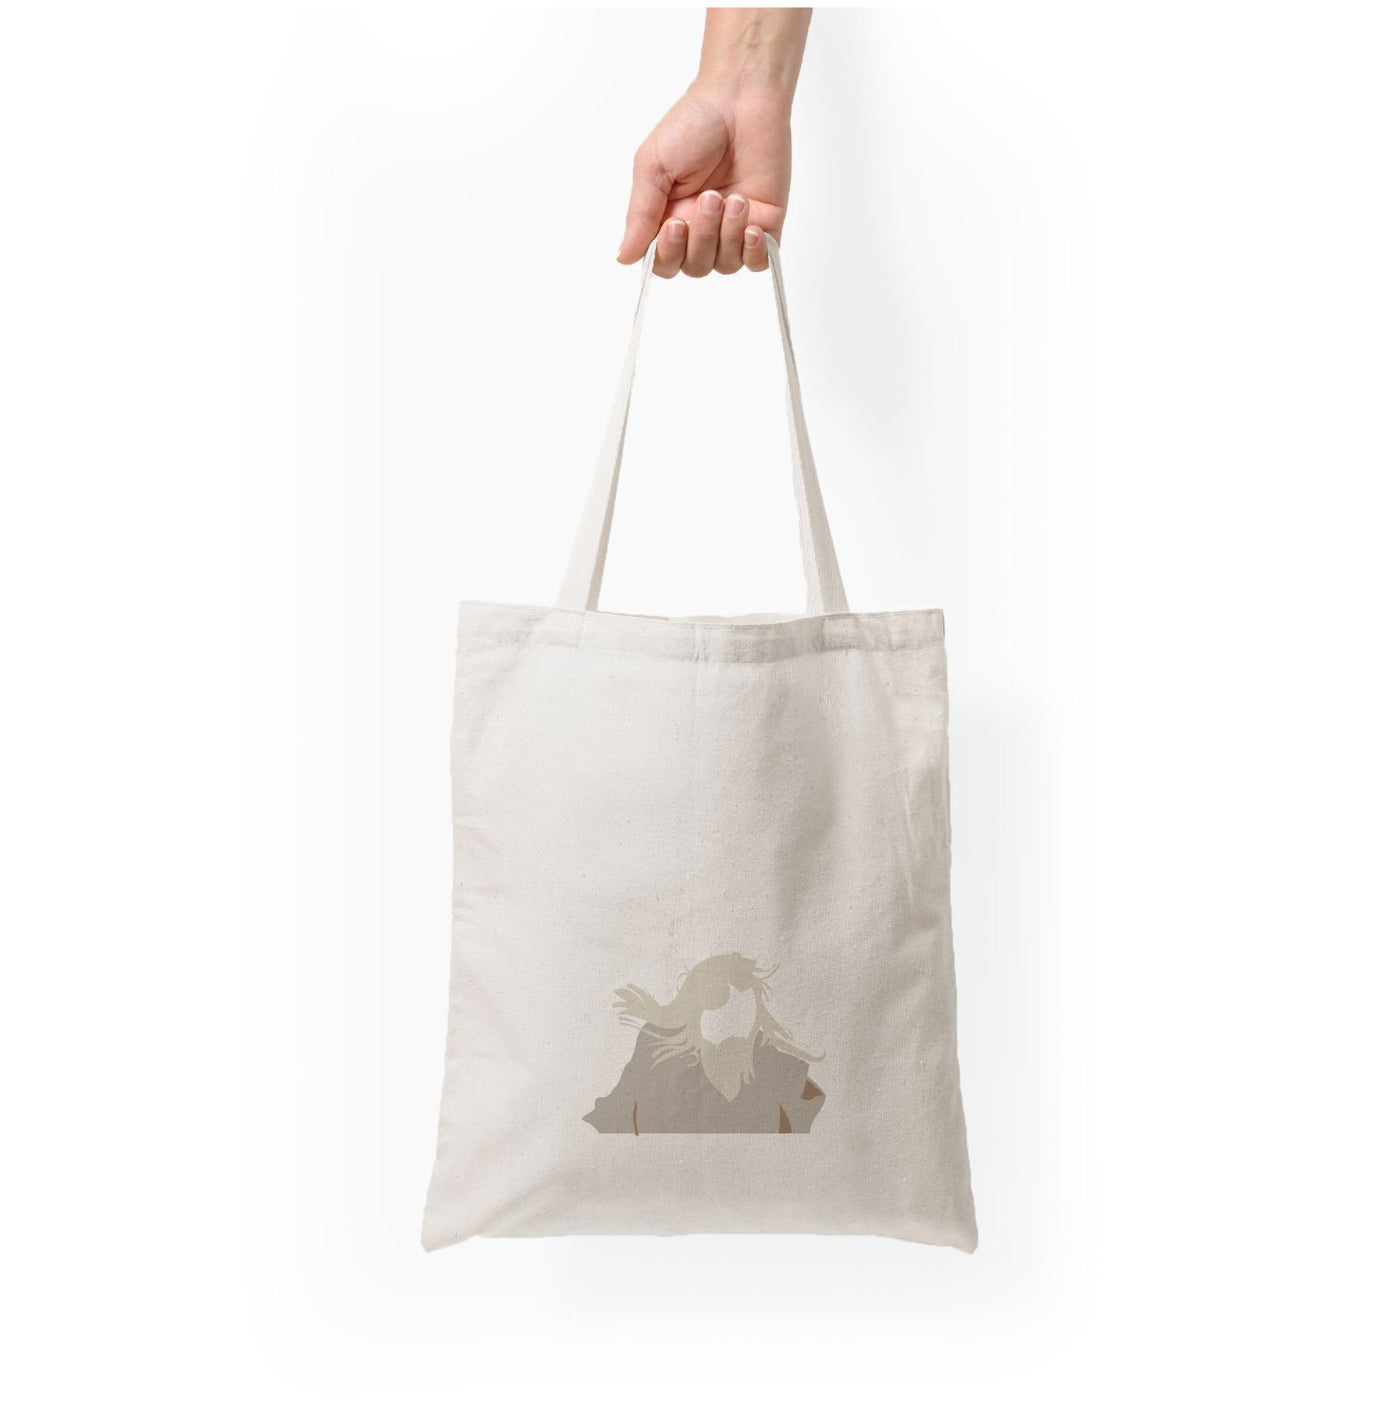 Gandalf - Lord Of The Rings Tote Bag